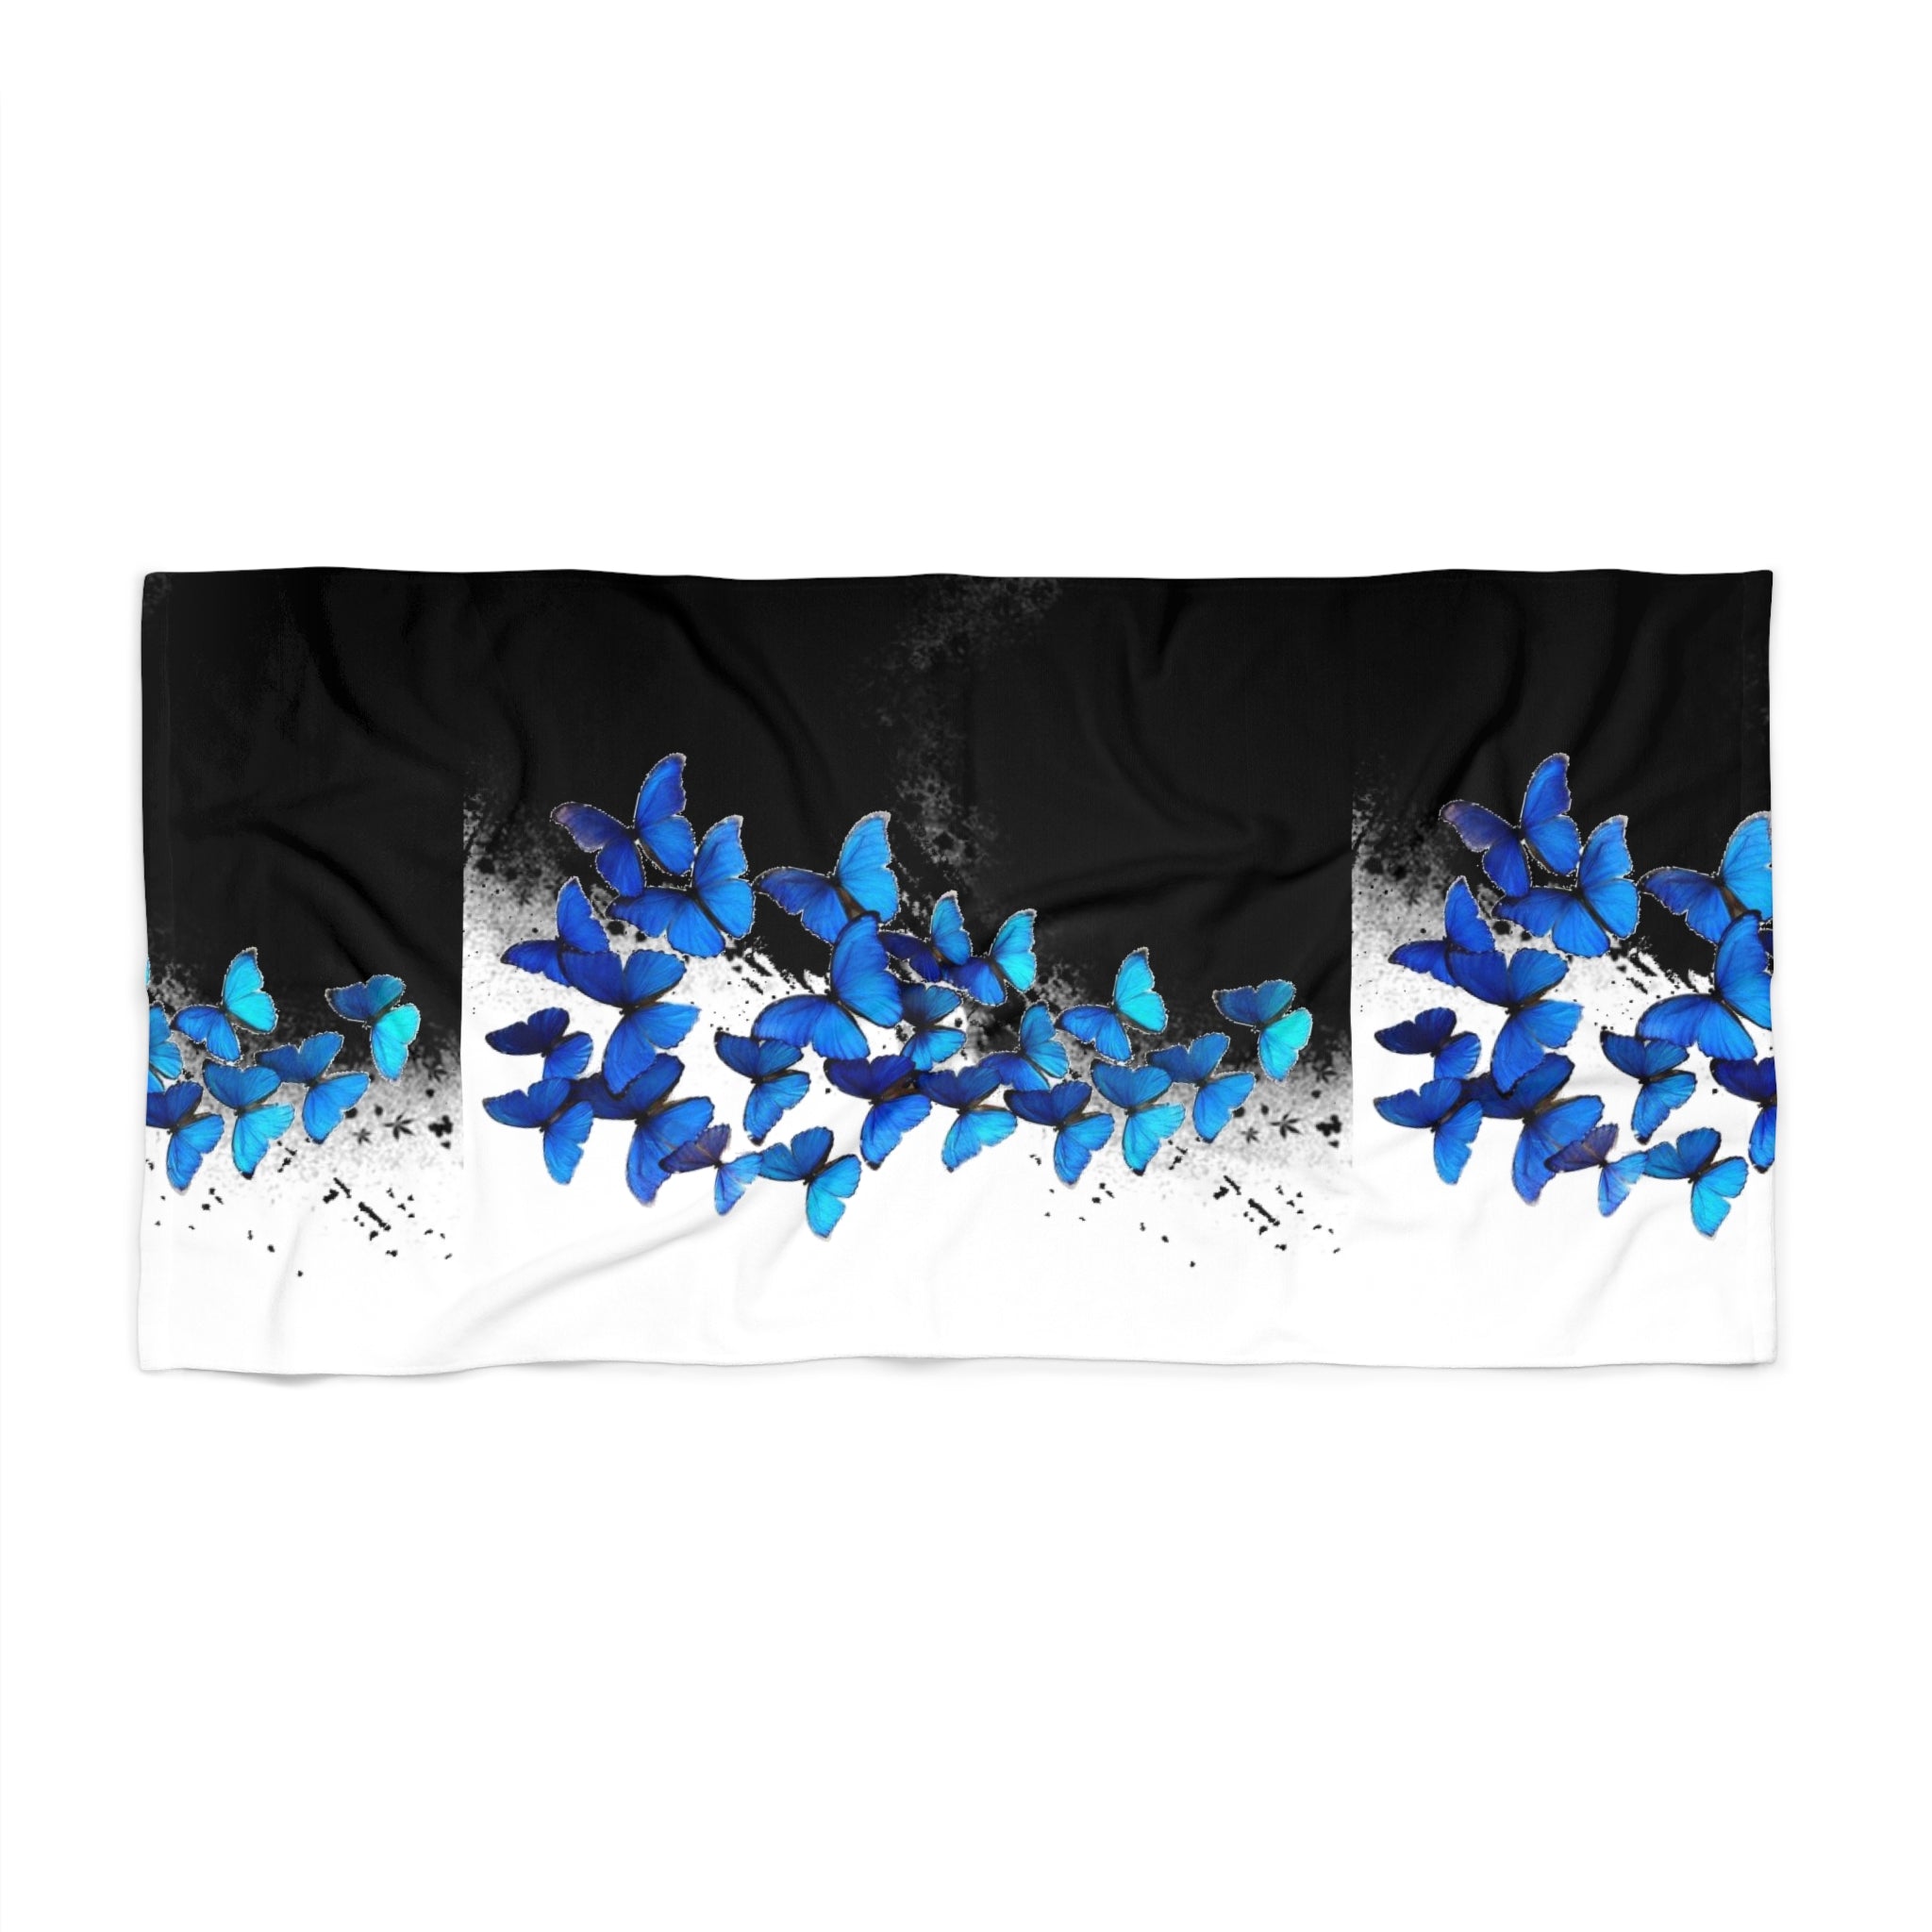 Flying Monochromatic Splendor: The Art of Beach Towel Butterflies in Black and White Home-clothes-jewelry